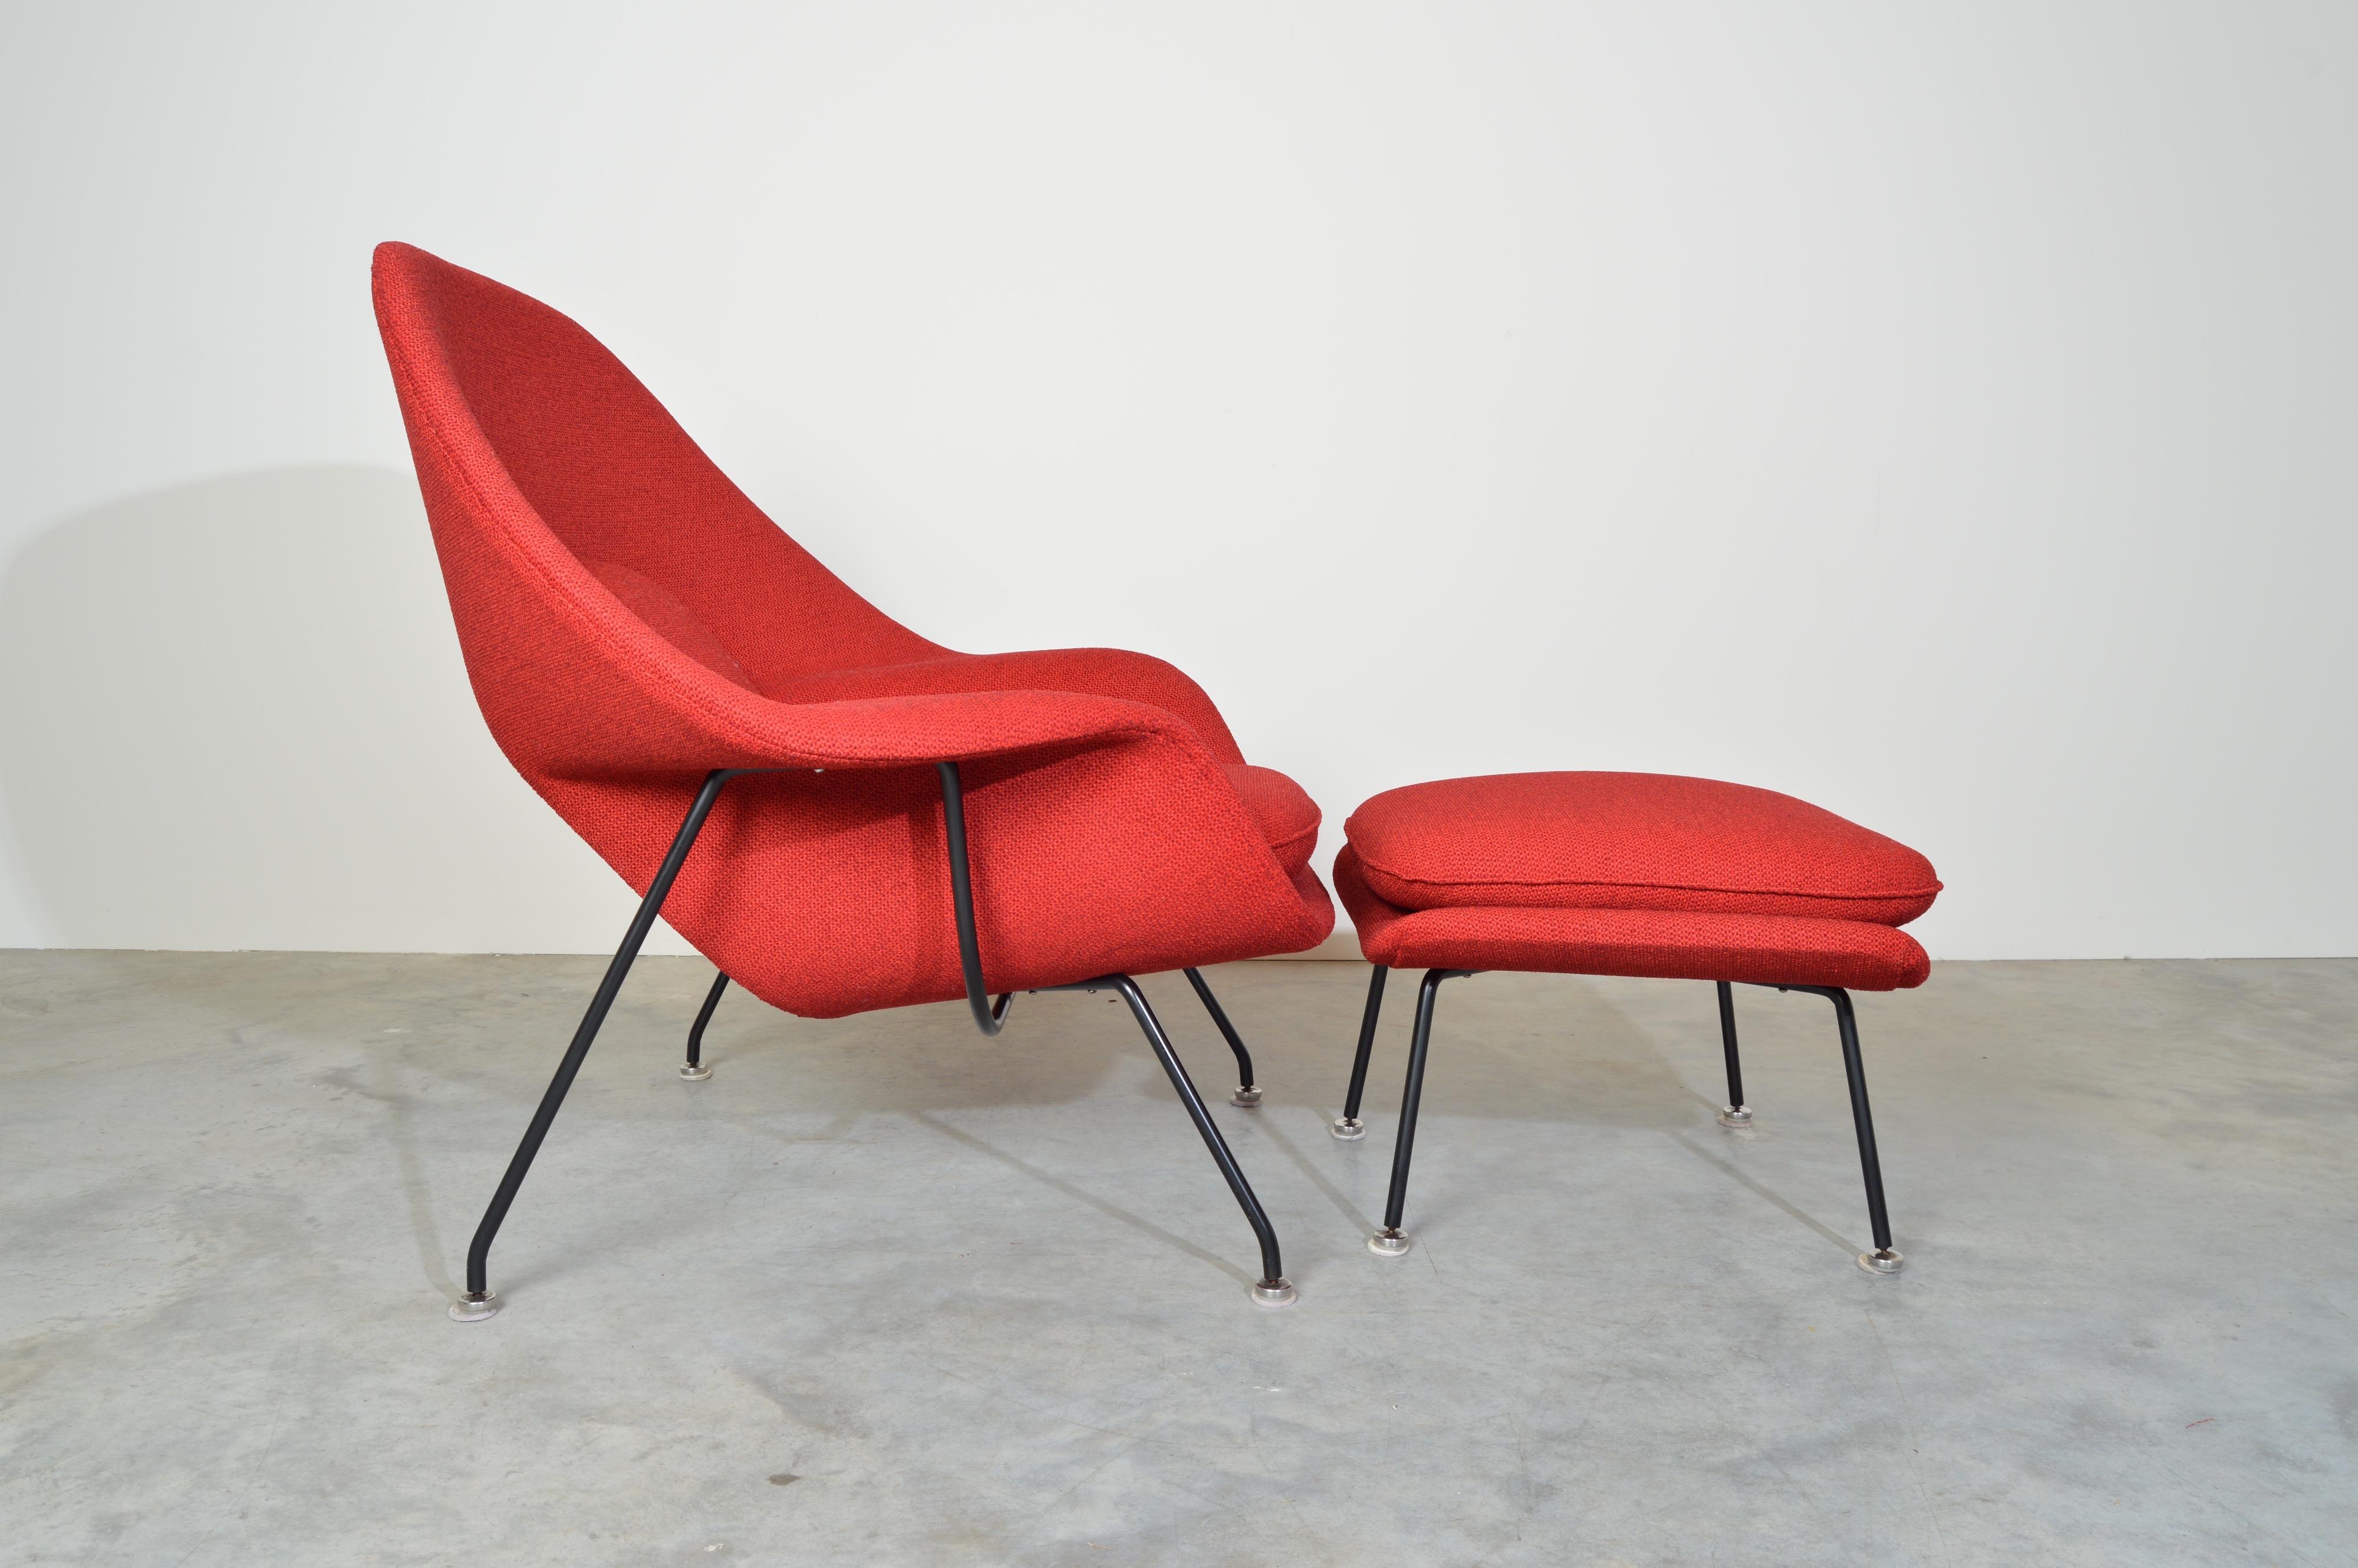 Eero Saarinen for Knoll Womb chair and ottoman produced in 1969 as documented on its frame having Knoll tweed upholstery. 
 In stunning condition. Fresh foam and new old stock Knoll upholstery applied by a Knoll specialist. 
Ottoman Dimensions: